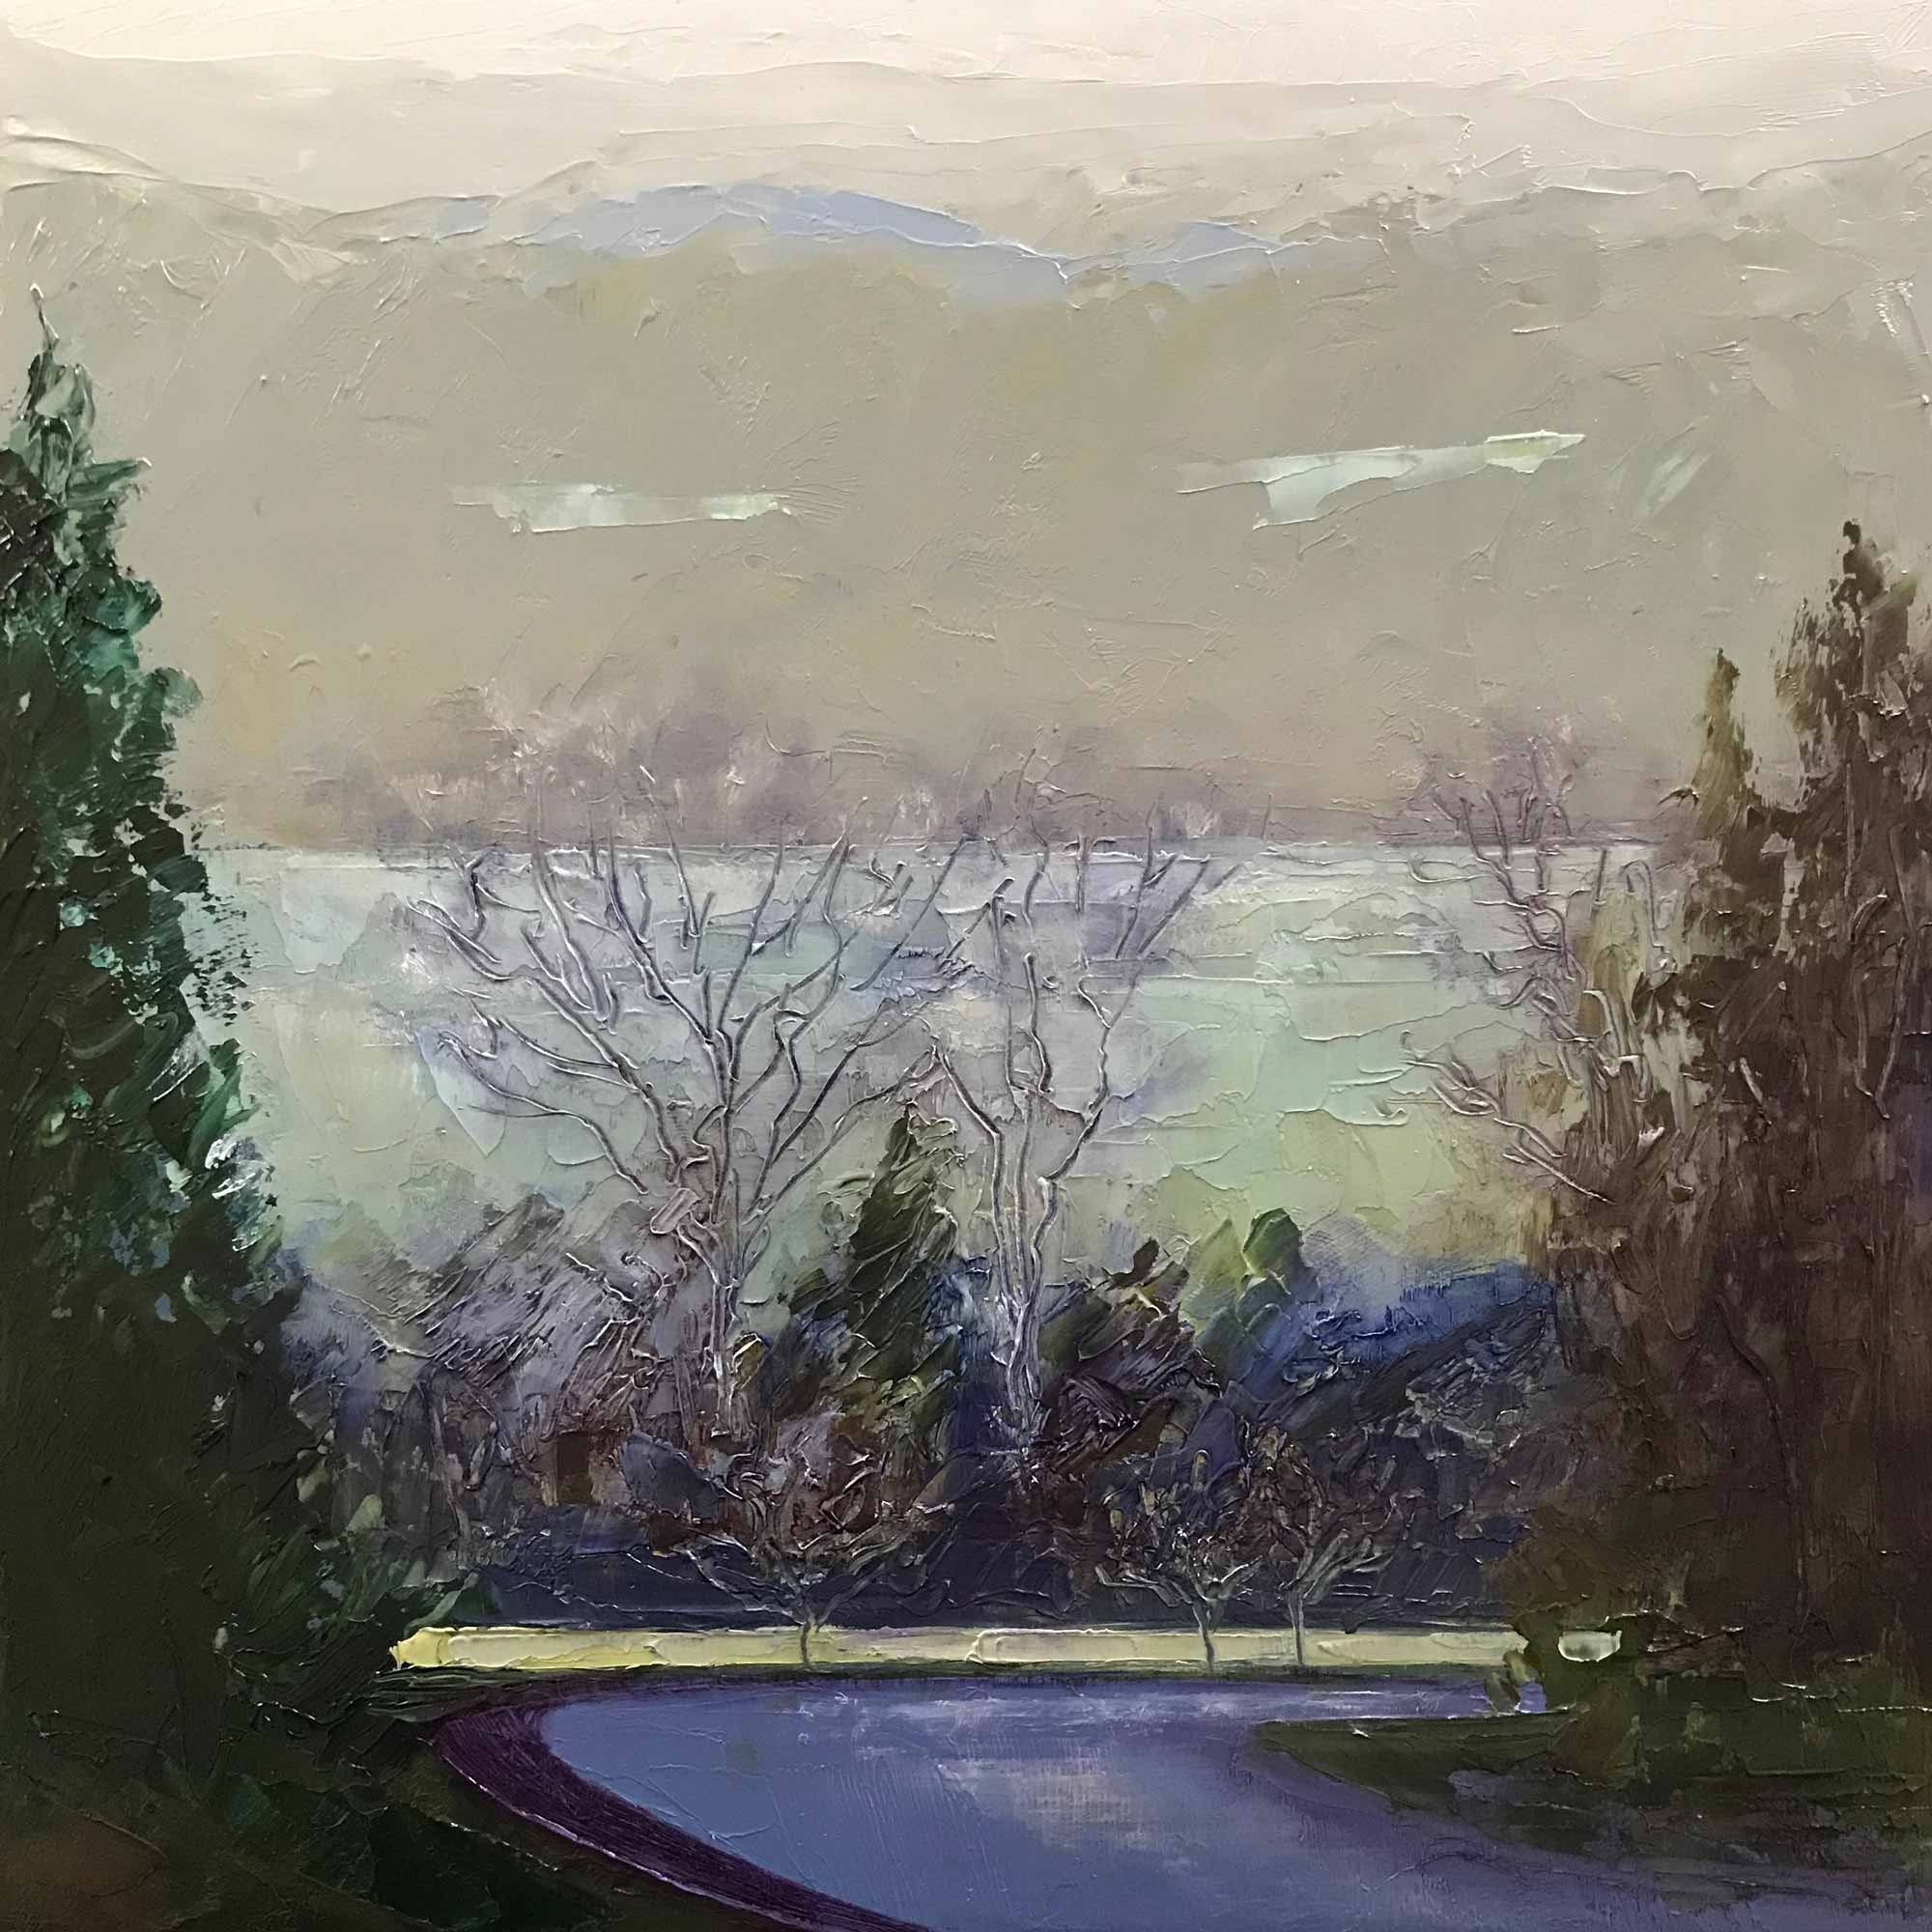 View from the Ridge No. 79, oil on panel, 8 x 8 inches, 2019